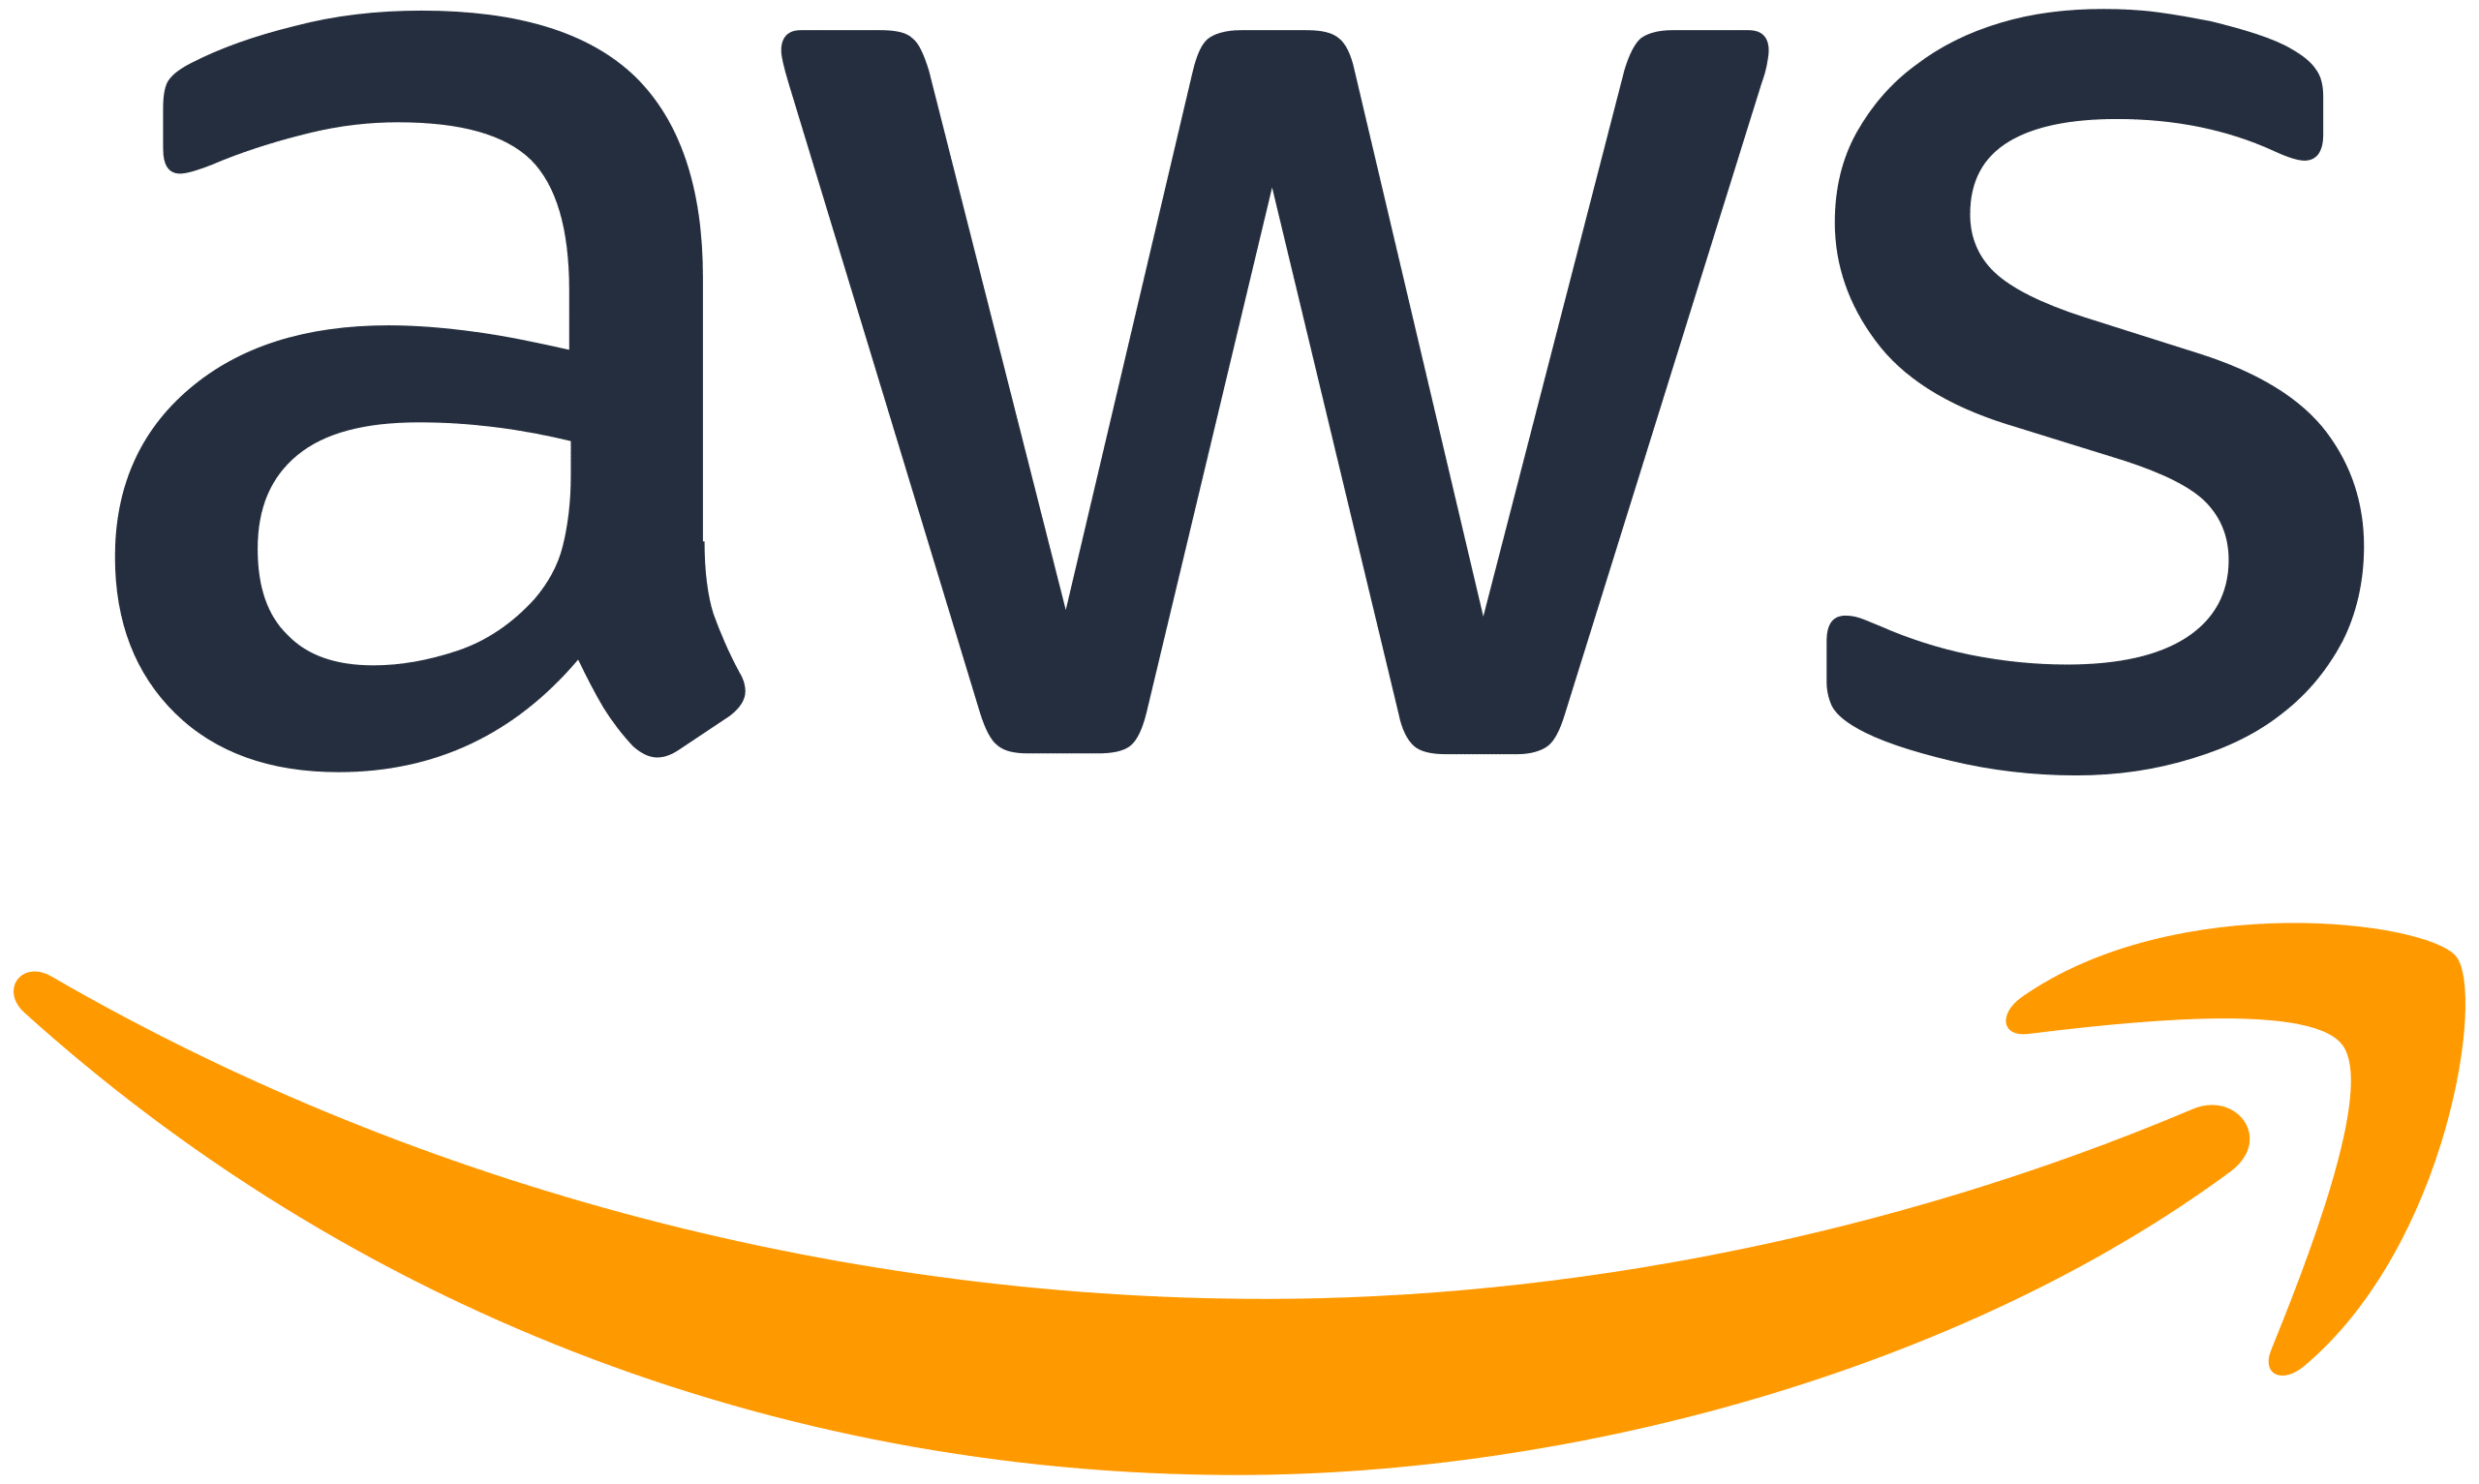 The image displays the Amazon Web Services (AWS) logo. It features the lowercase letters "aws" in bold, black font above a curved, orange arrow that points from the left to the right.